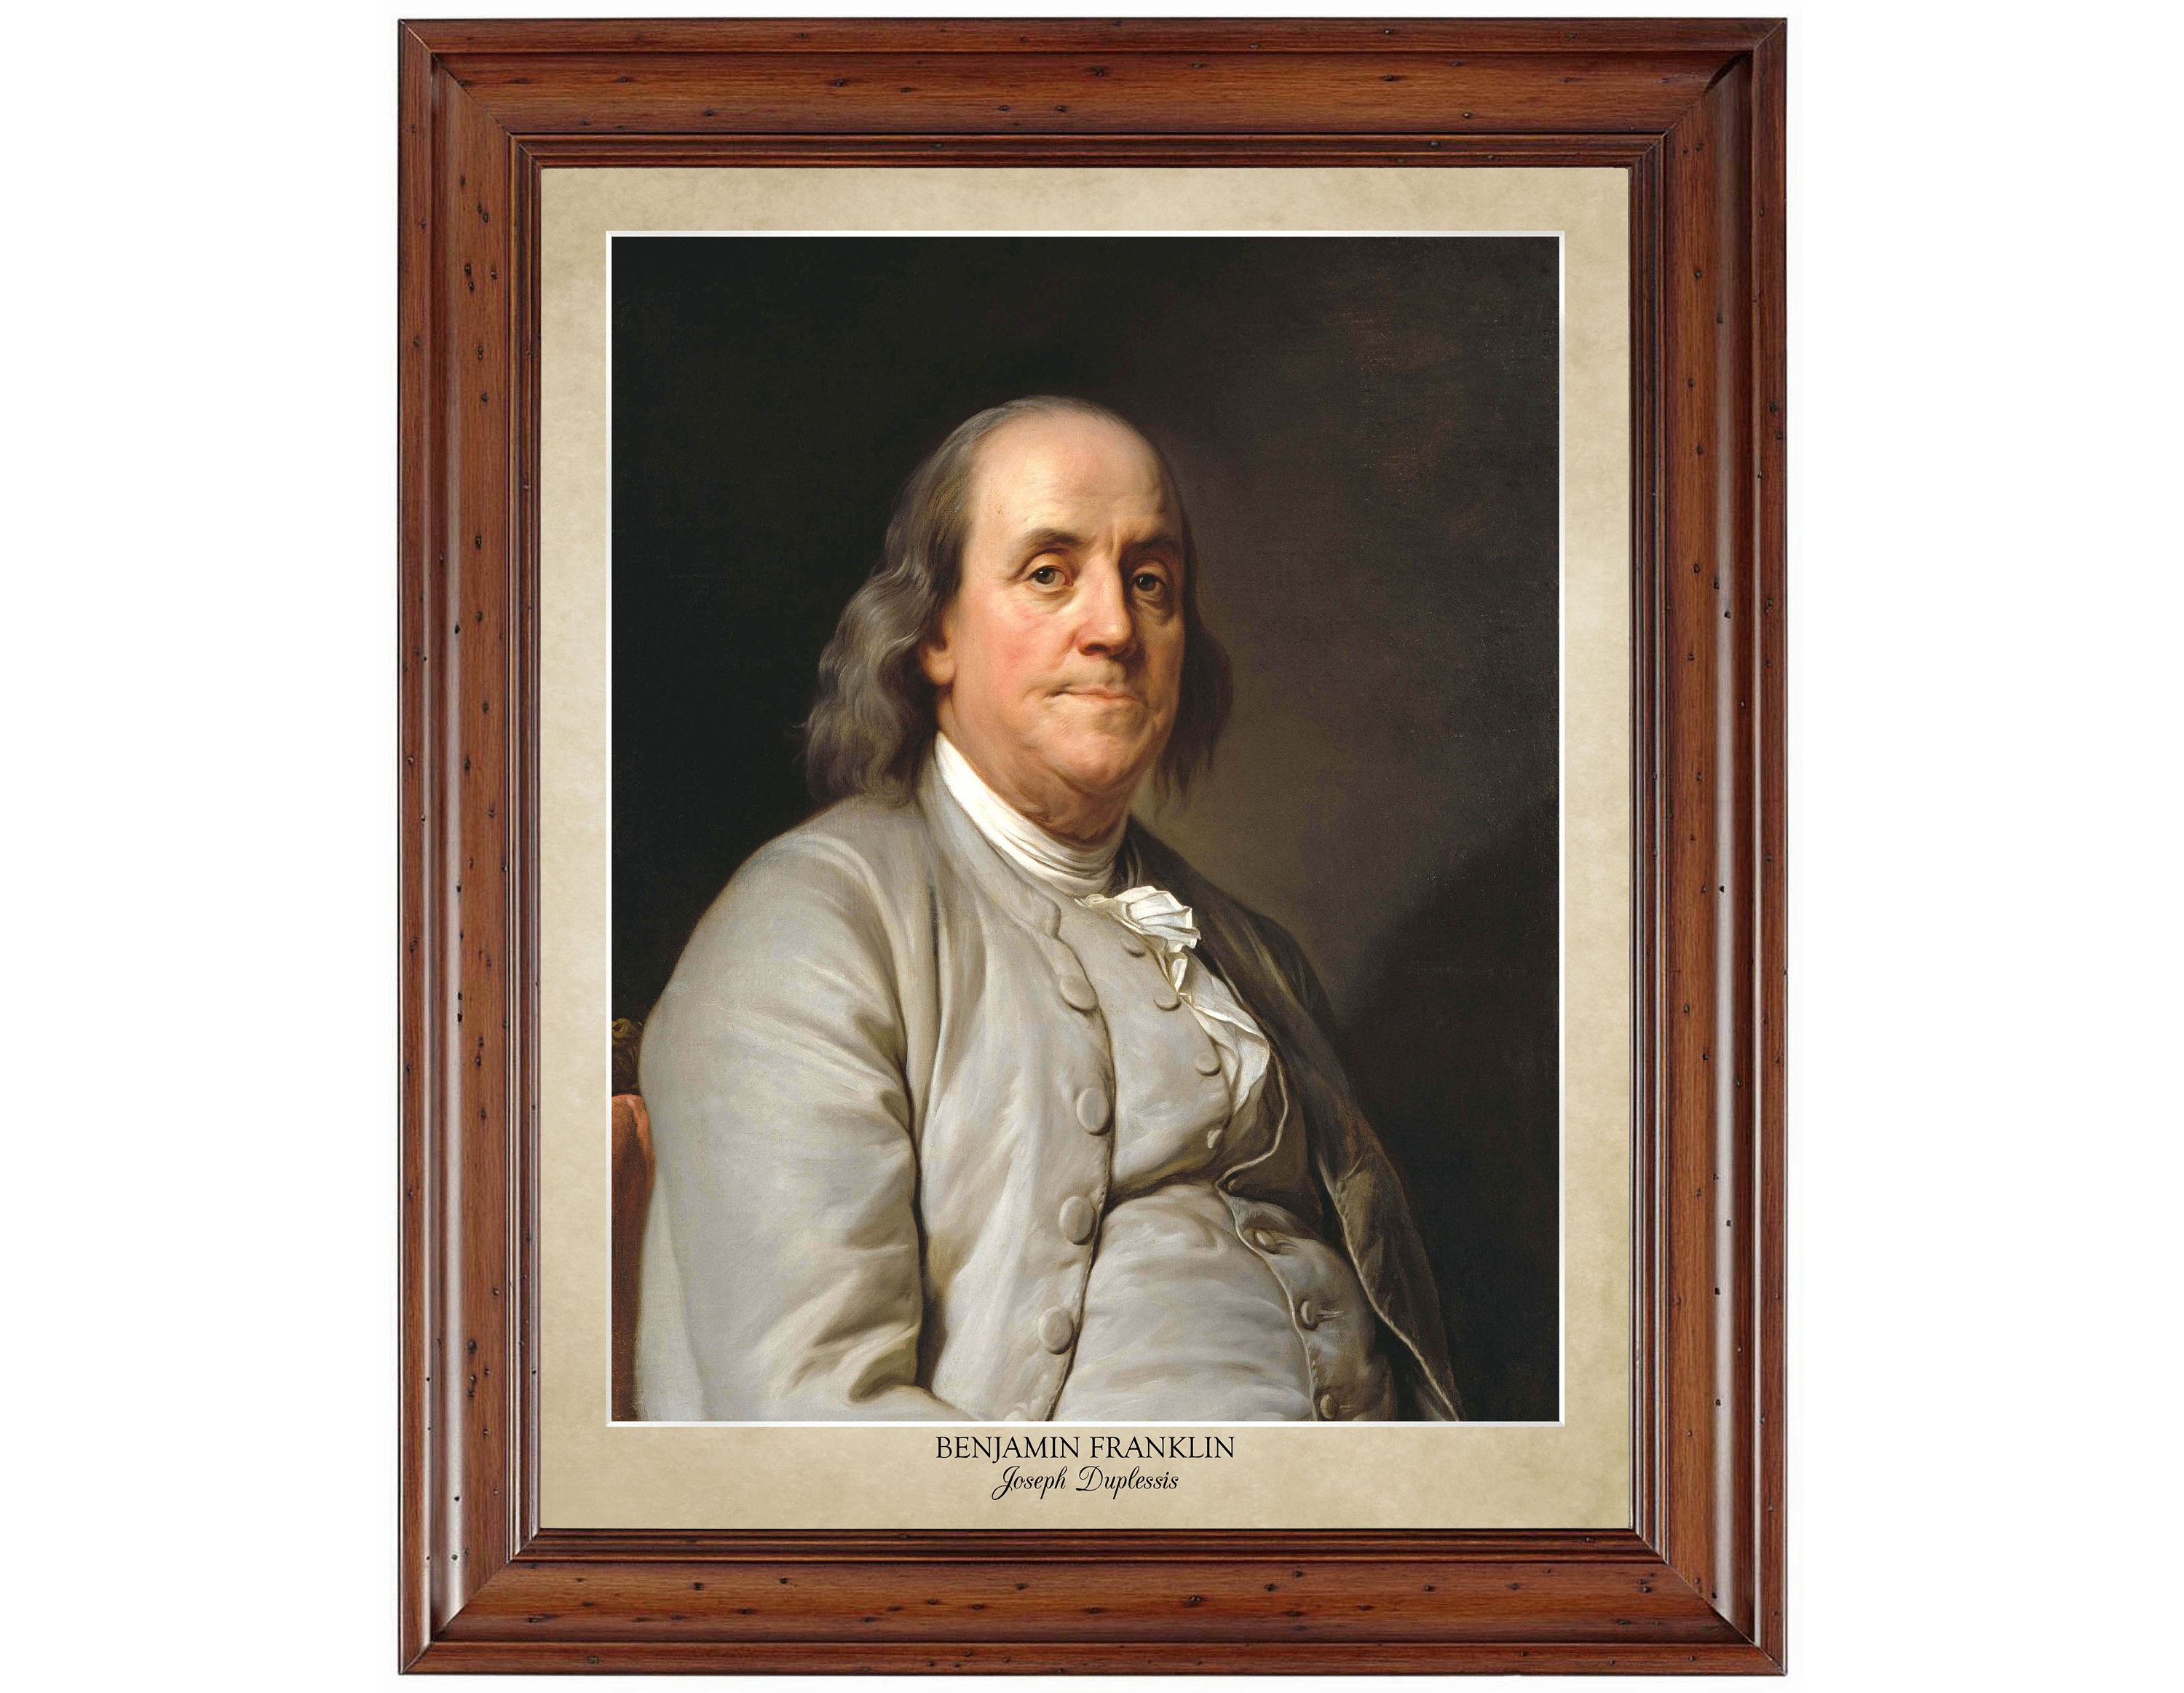 Benjamin Franklin Portrait by Joseph Duplessis 18x24 Print on Premium Photo  Paper does Not Include Frame -  Canada